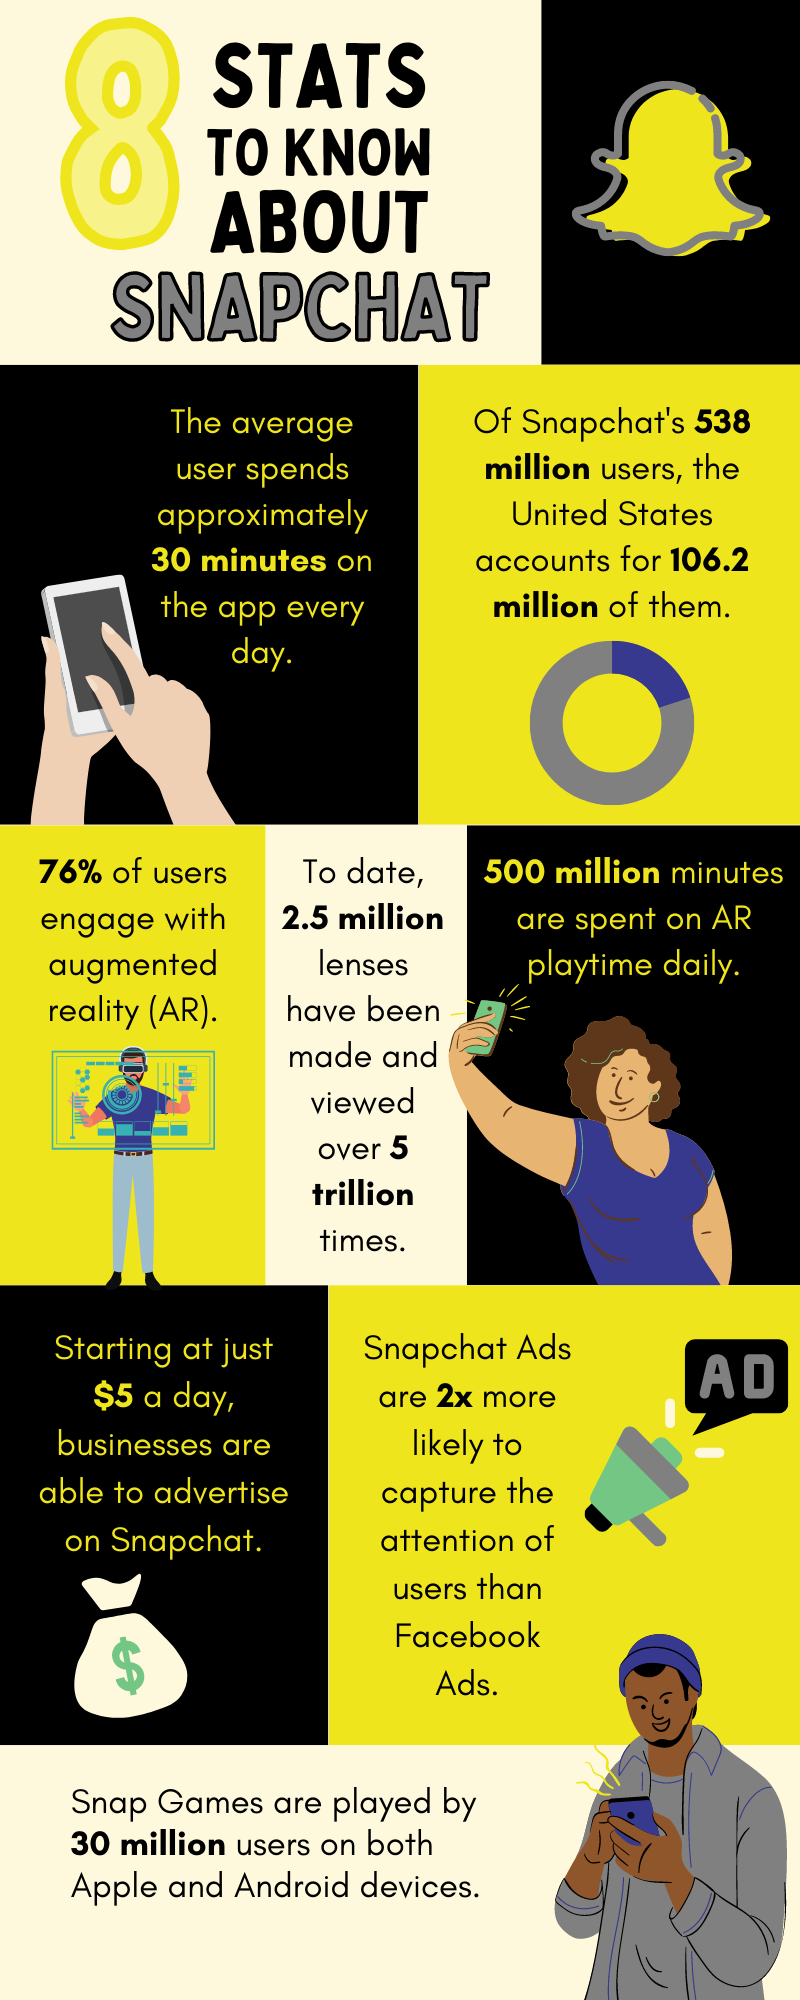 8 Stats to Know About Snapchat